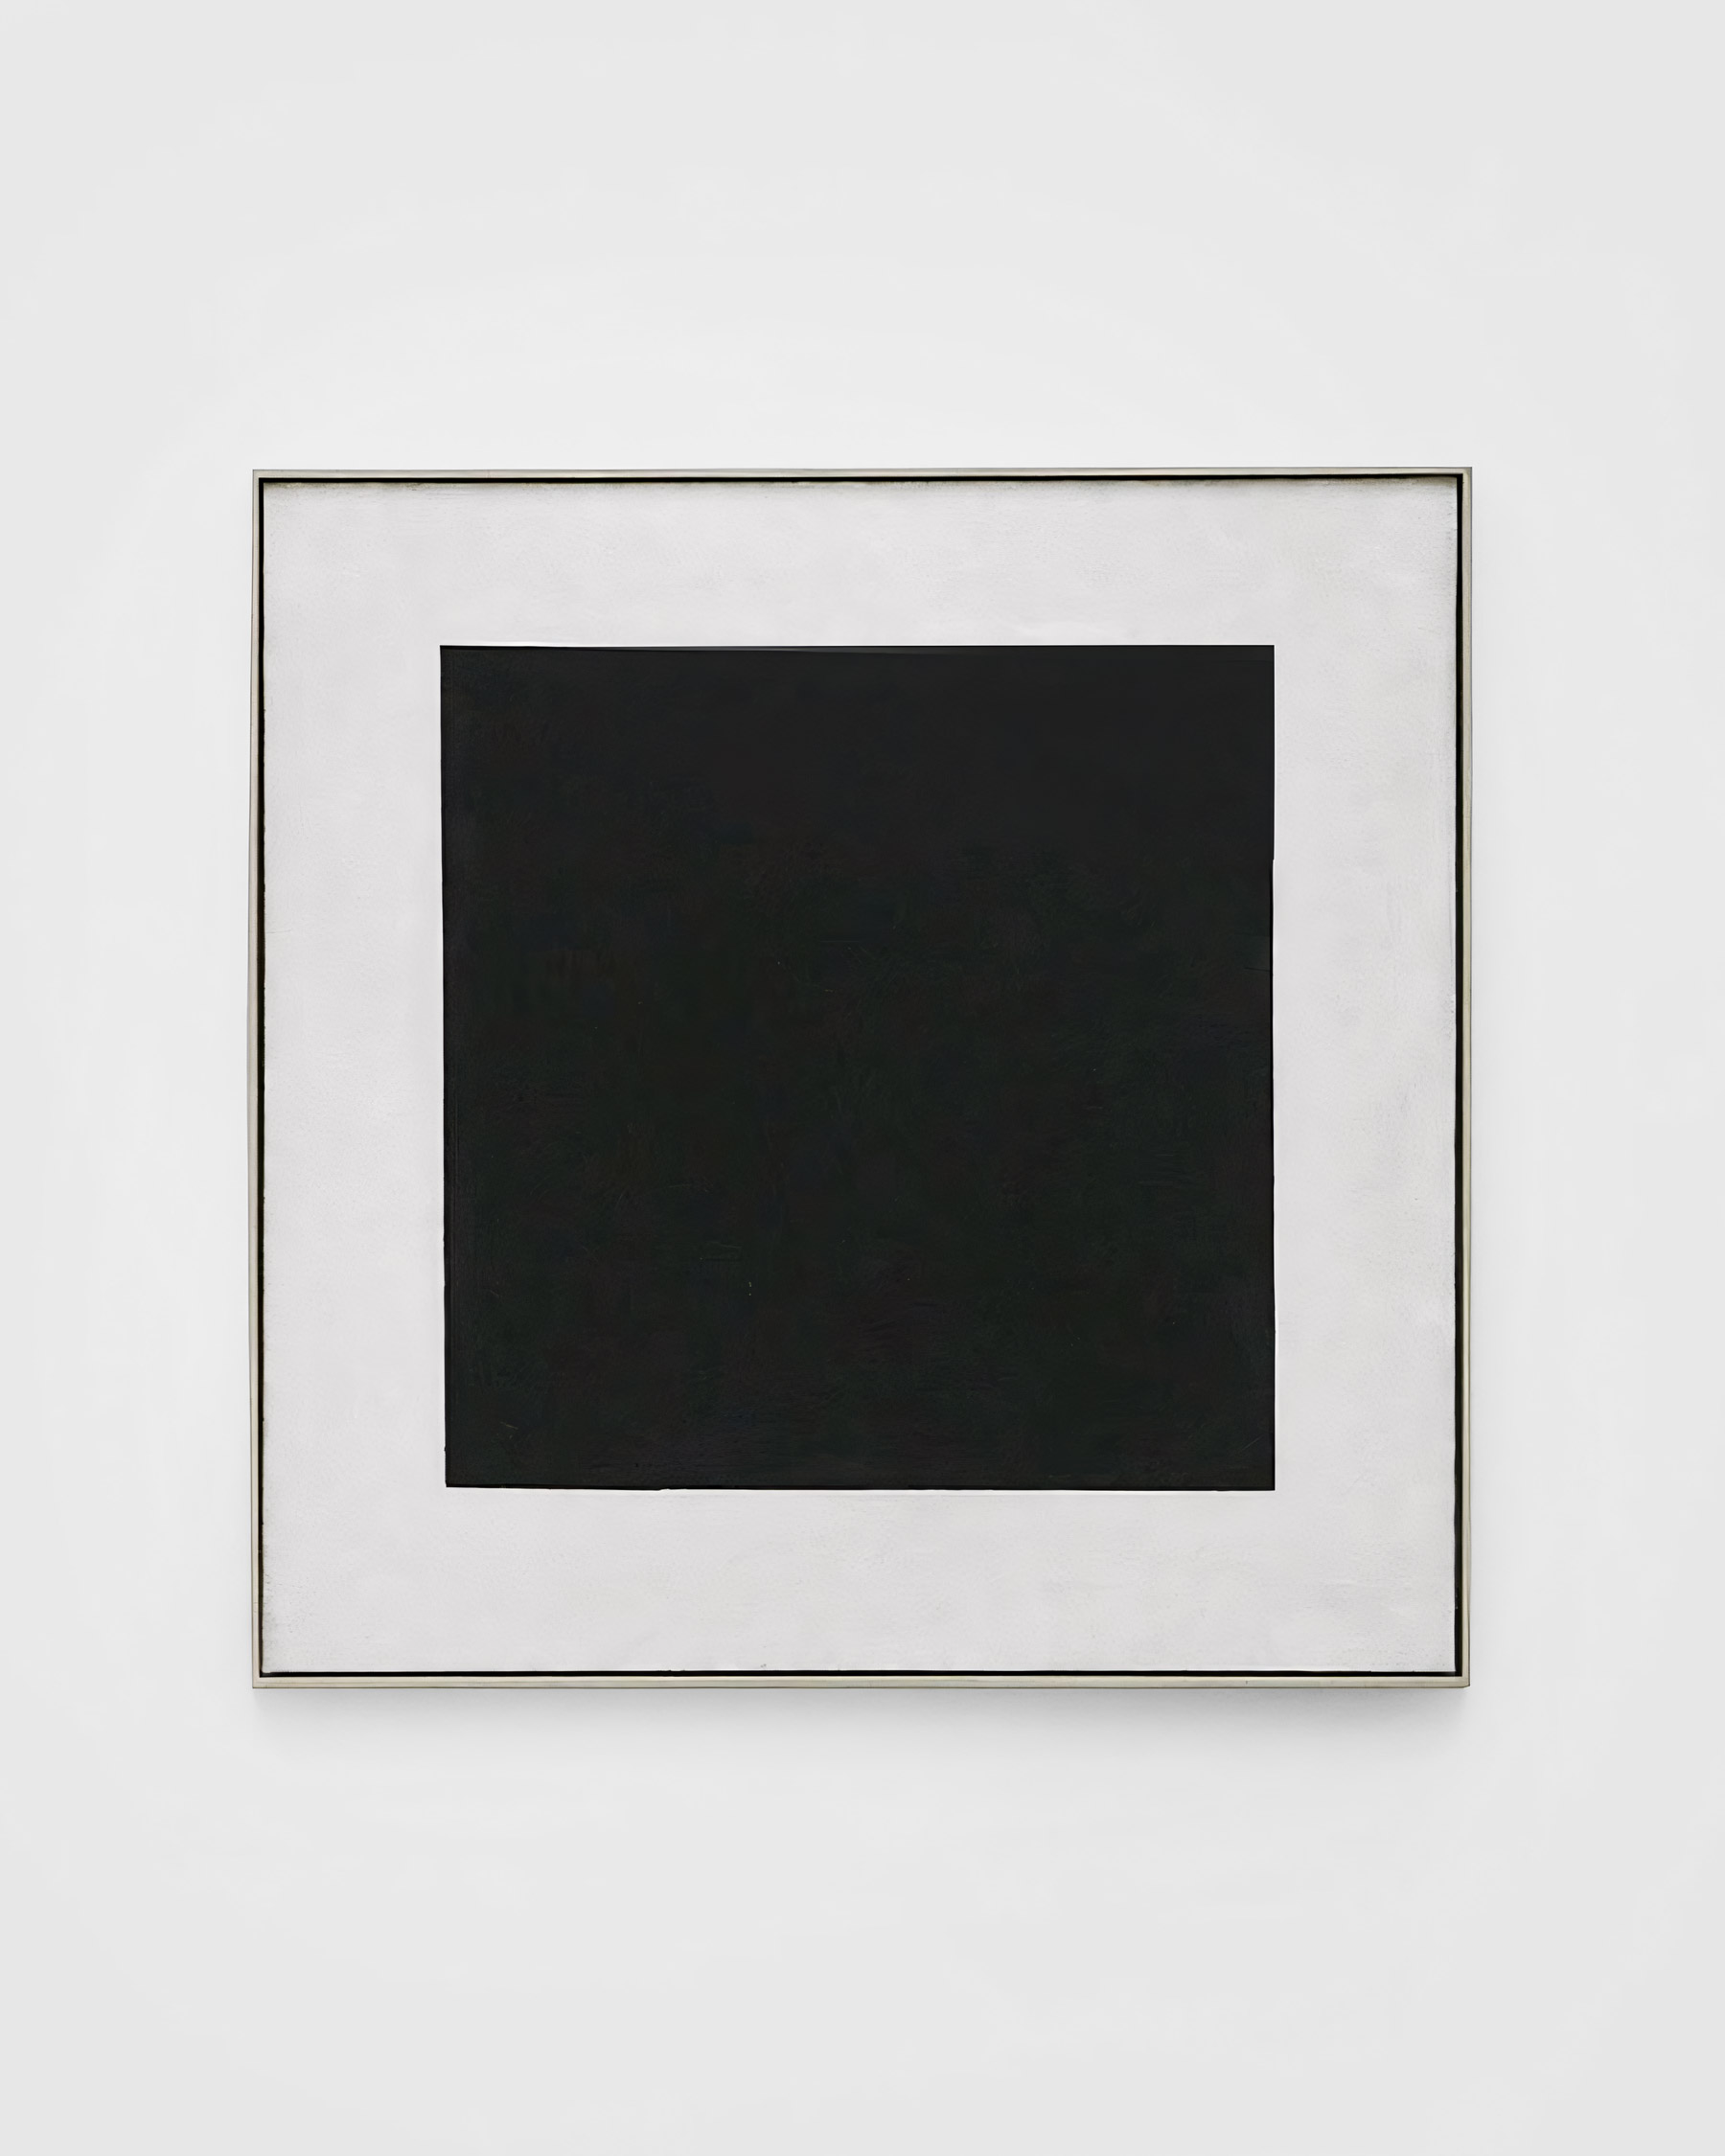 Kazimir Malevich, The Black Square, 1915, Image is in Public Domain